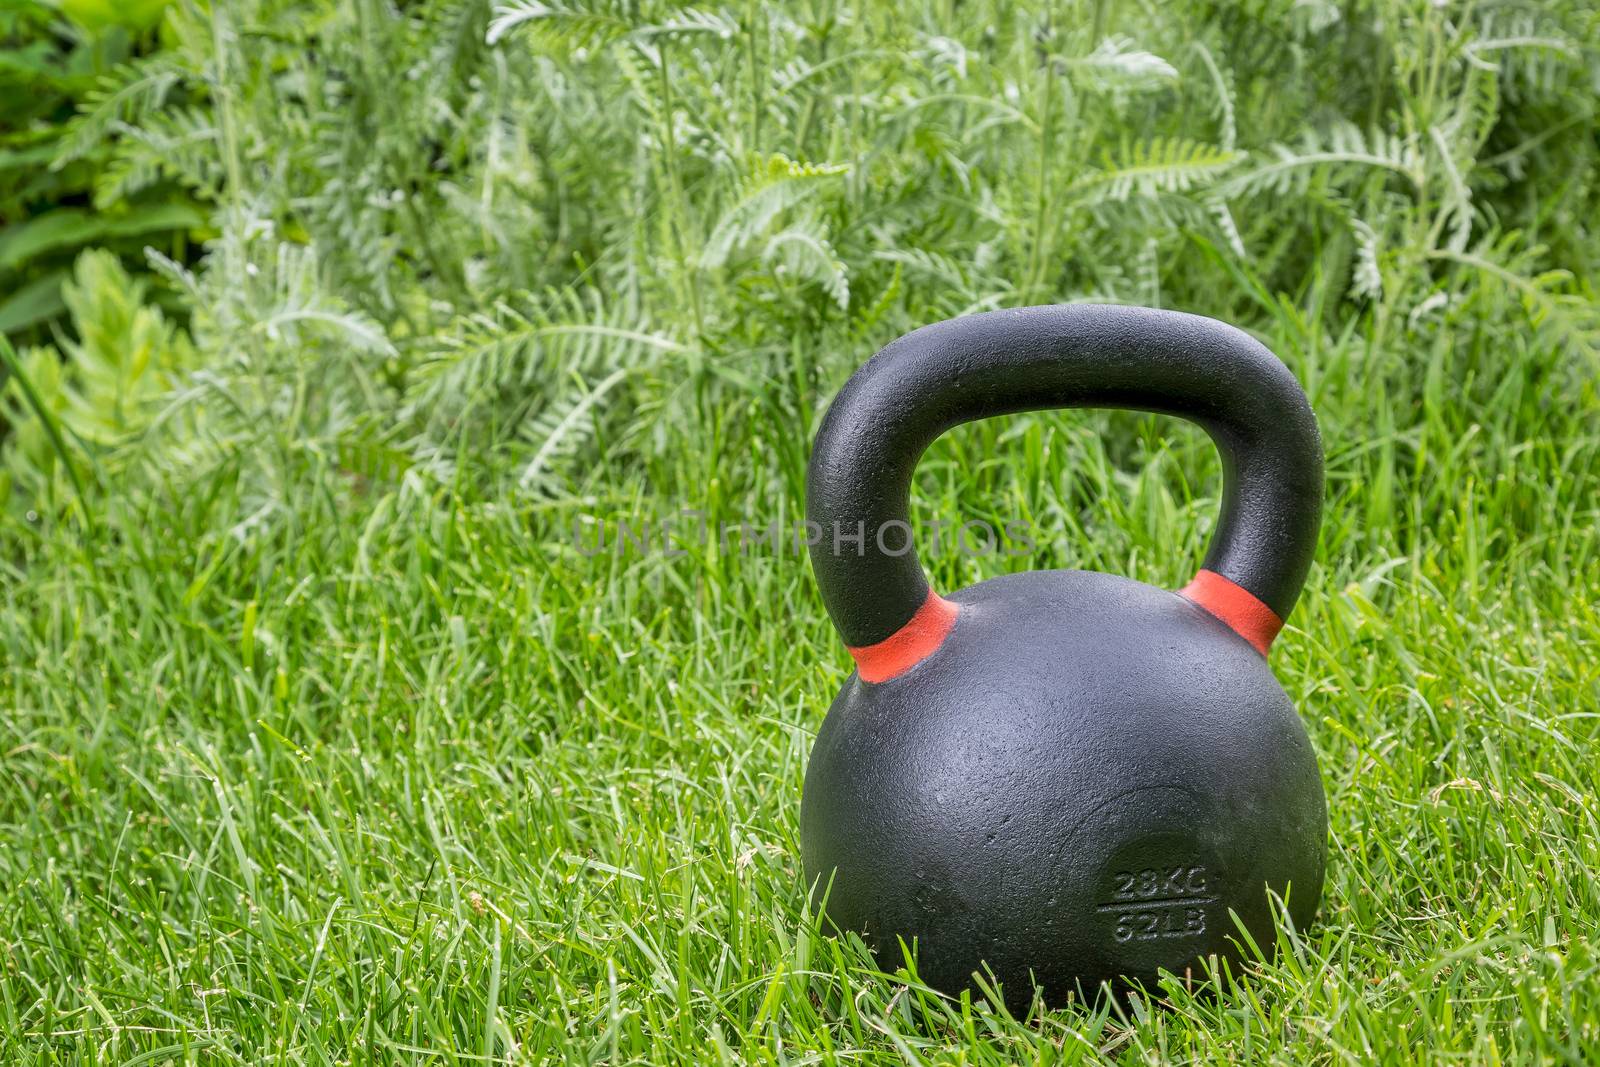 heavy iron competition kettlebell (62lb - 28 kg) on green grass in backyard - outdoor fitness concept